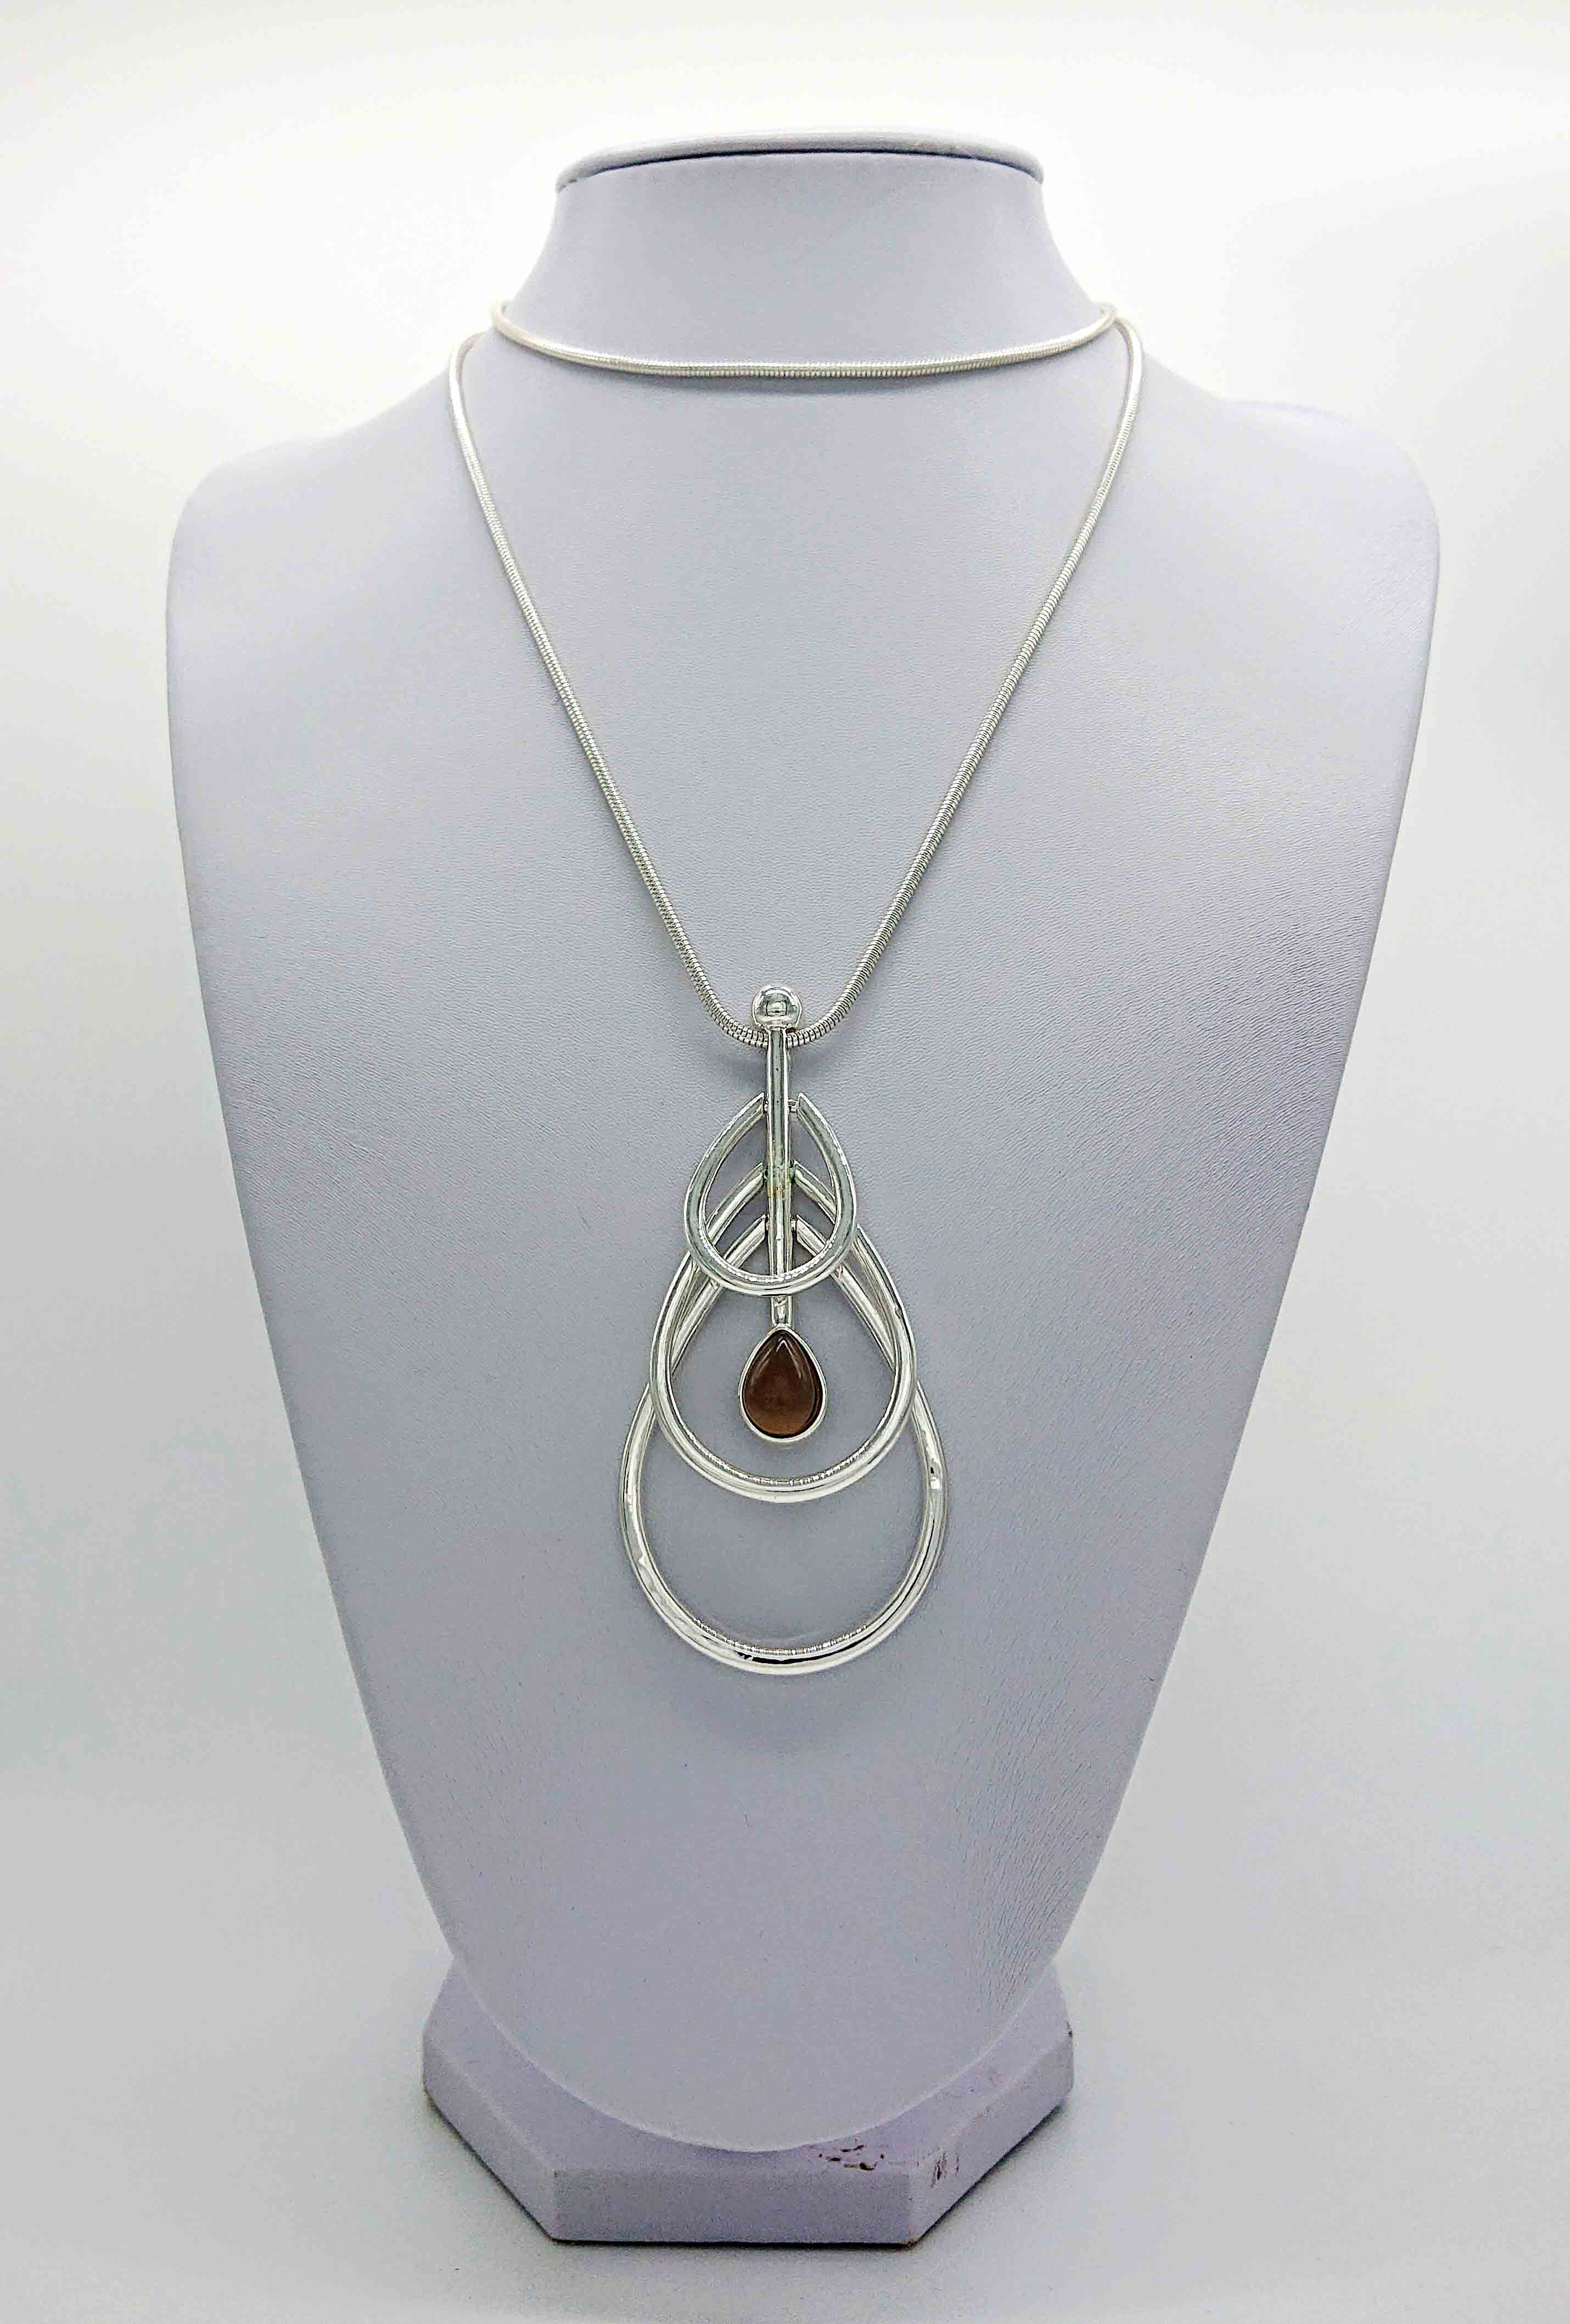 Famile Necklace Longer length silver box chain necklace with a three tiered pendant. A drop pendant with a single dark opal stone effect feature. This beautiful long necklace is a statement piece that can be worn when casual as well as more formal wear Nickel free, silver coloured mixed metal